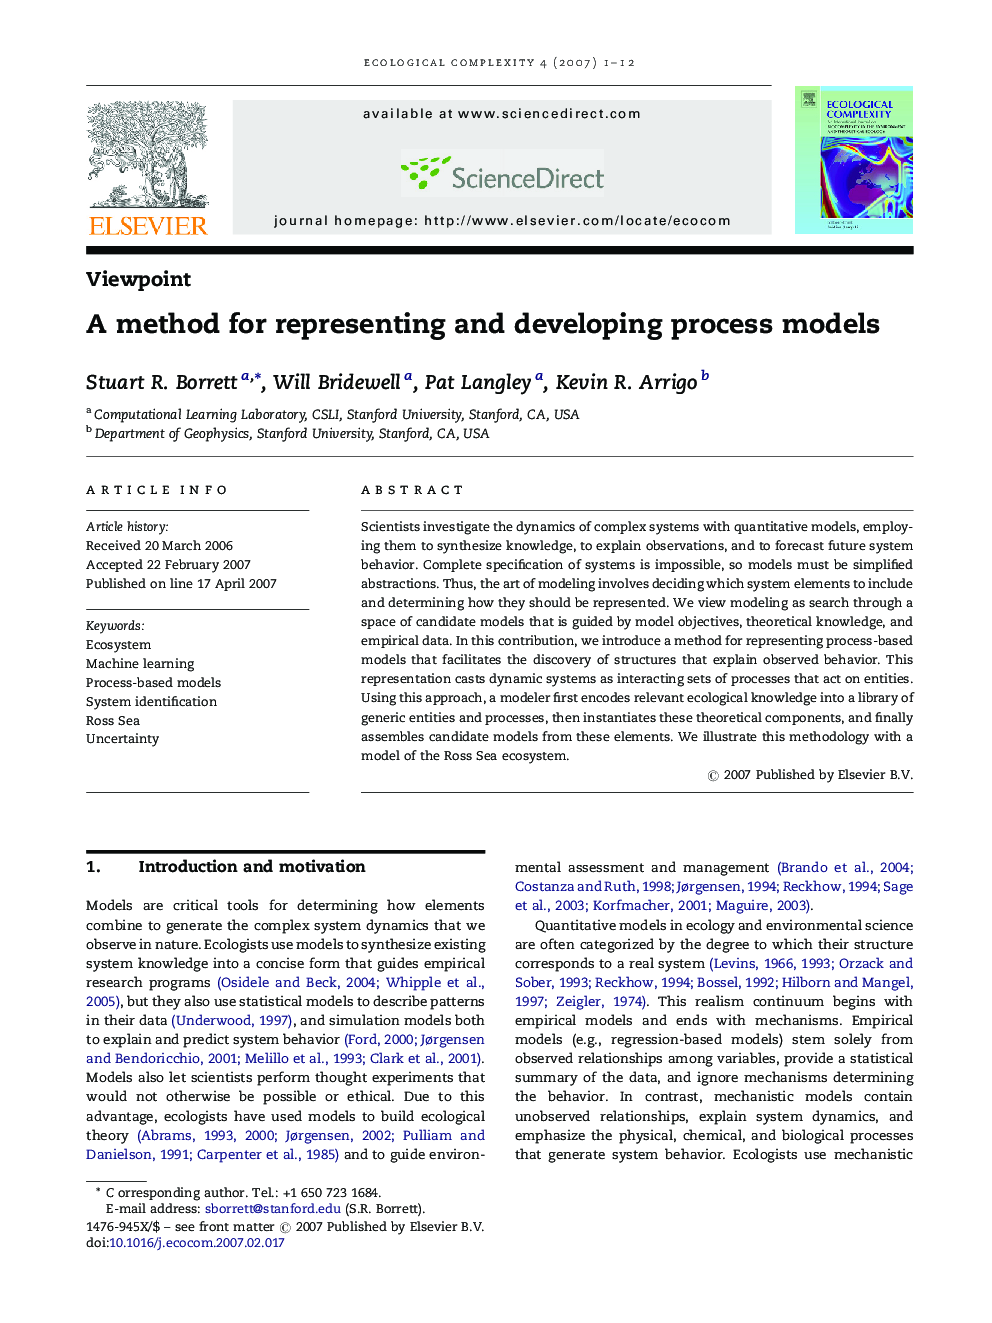 A method for representing and developing process models